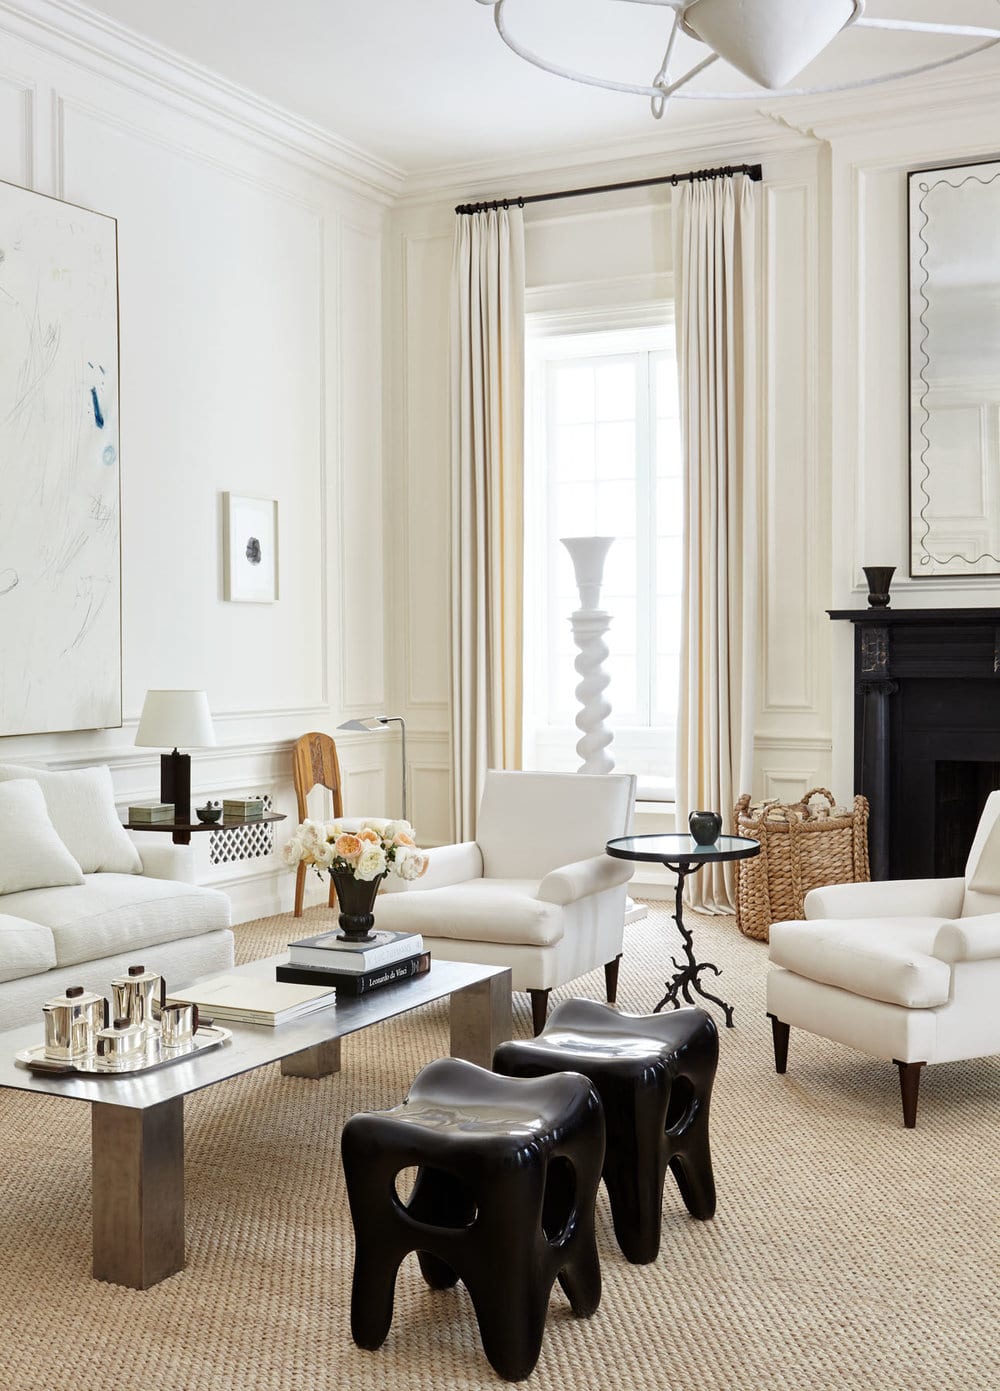 chic-creamy-neutral-living-room-in-black-and-white-by-alyssa-kapito-room-of-the-week-on-coco-kelley